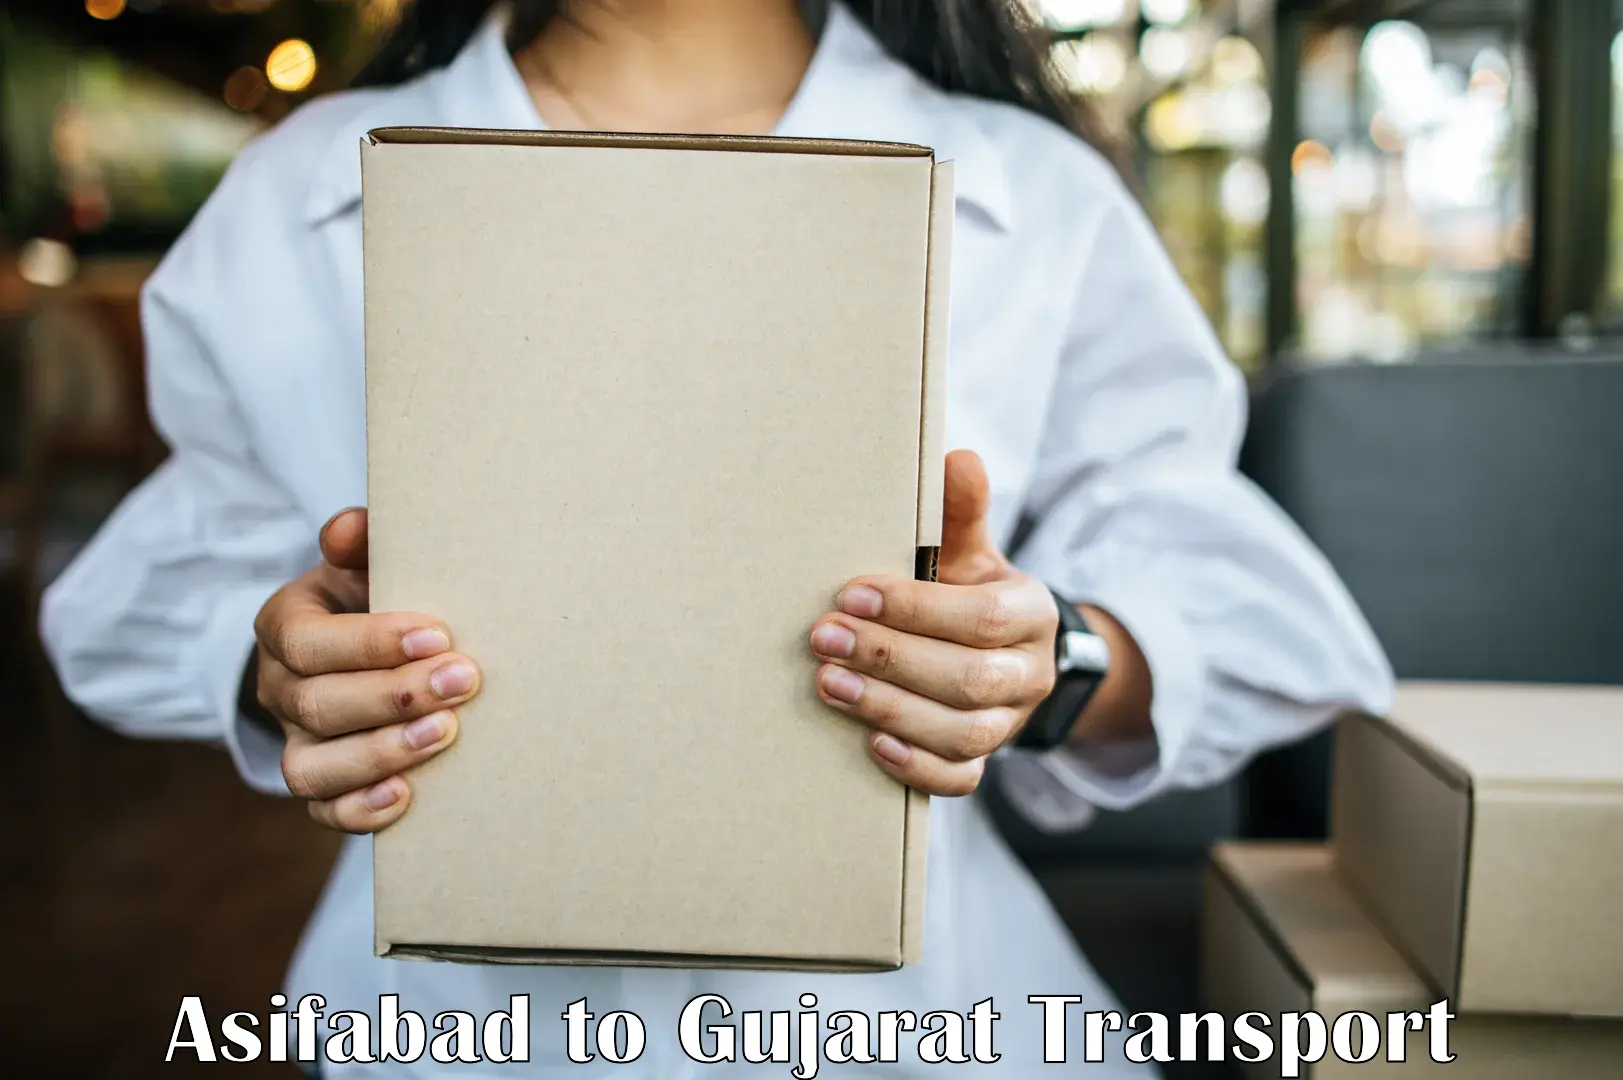 Commercial transport service Asifabad to Mahuva